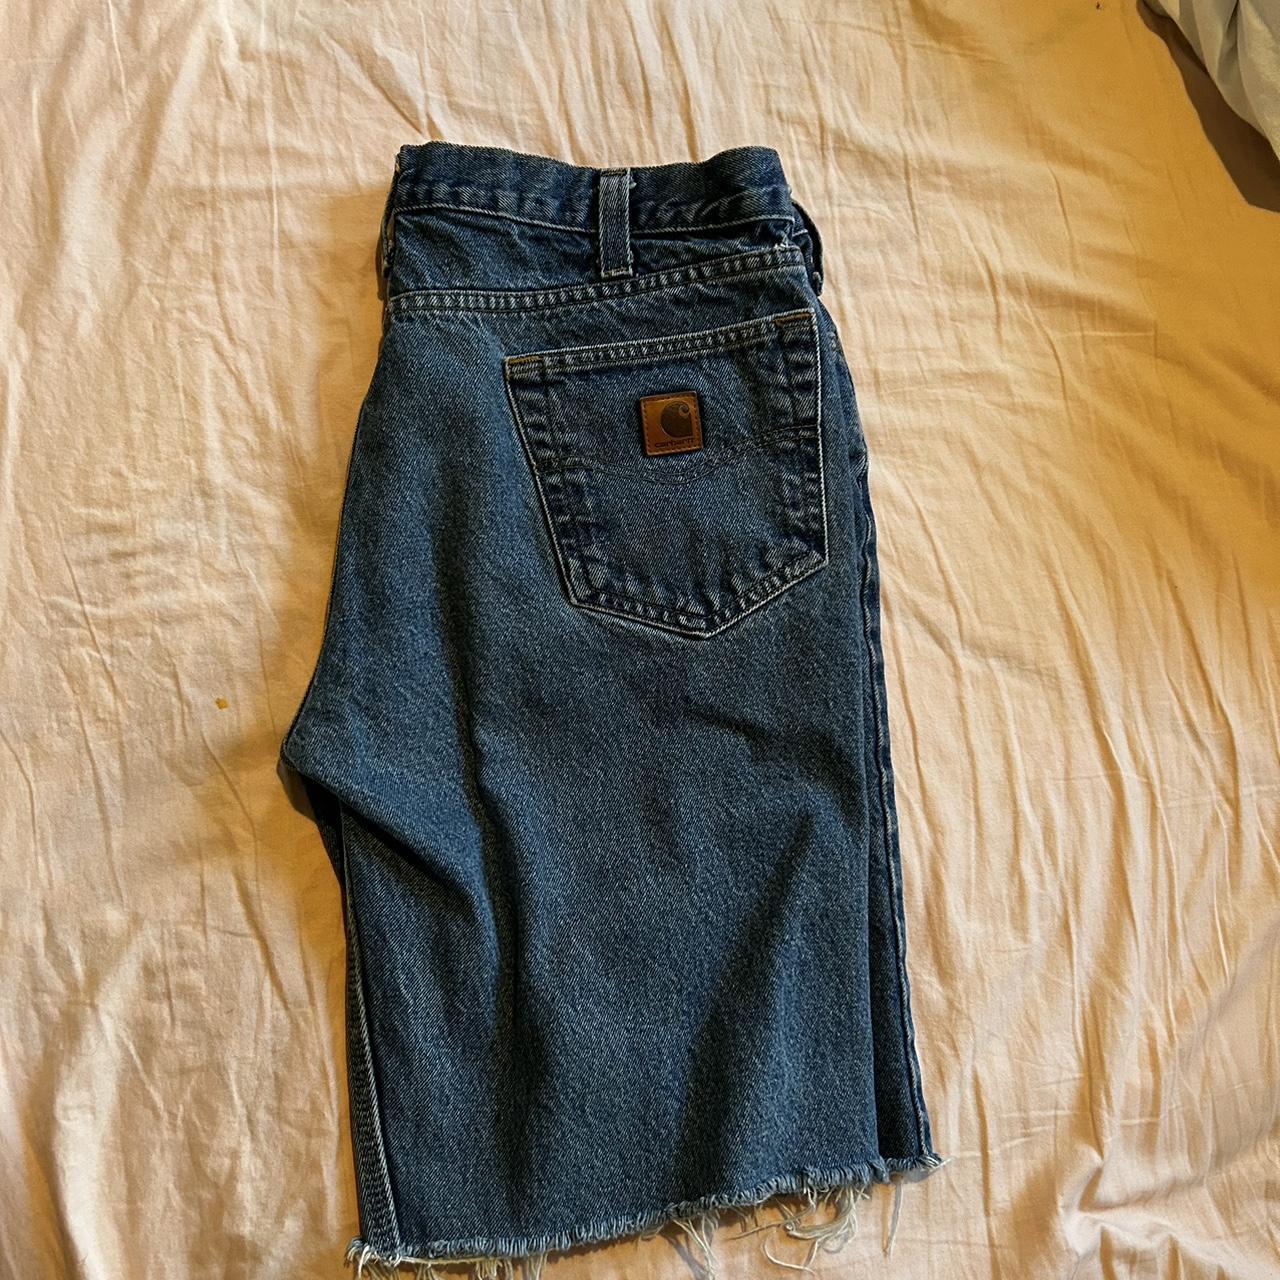 Carhartt jorts. Goes right below the knees and I’m 6,2 - Depop